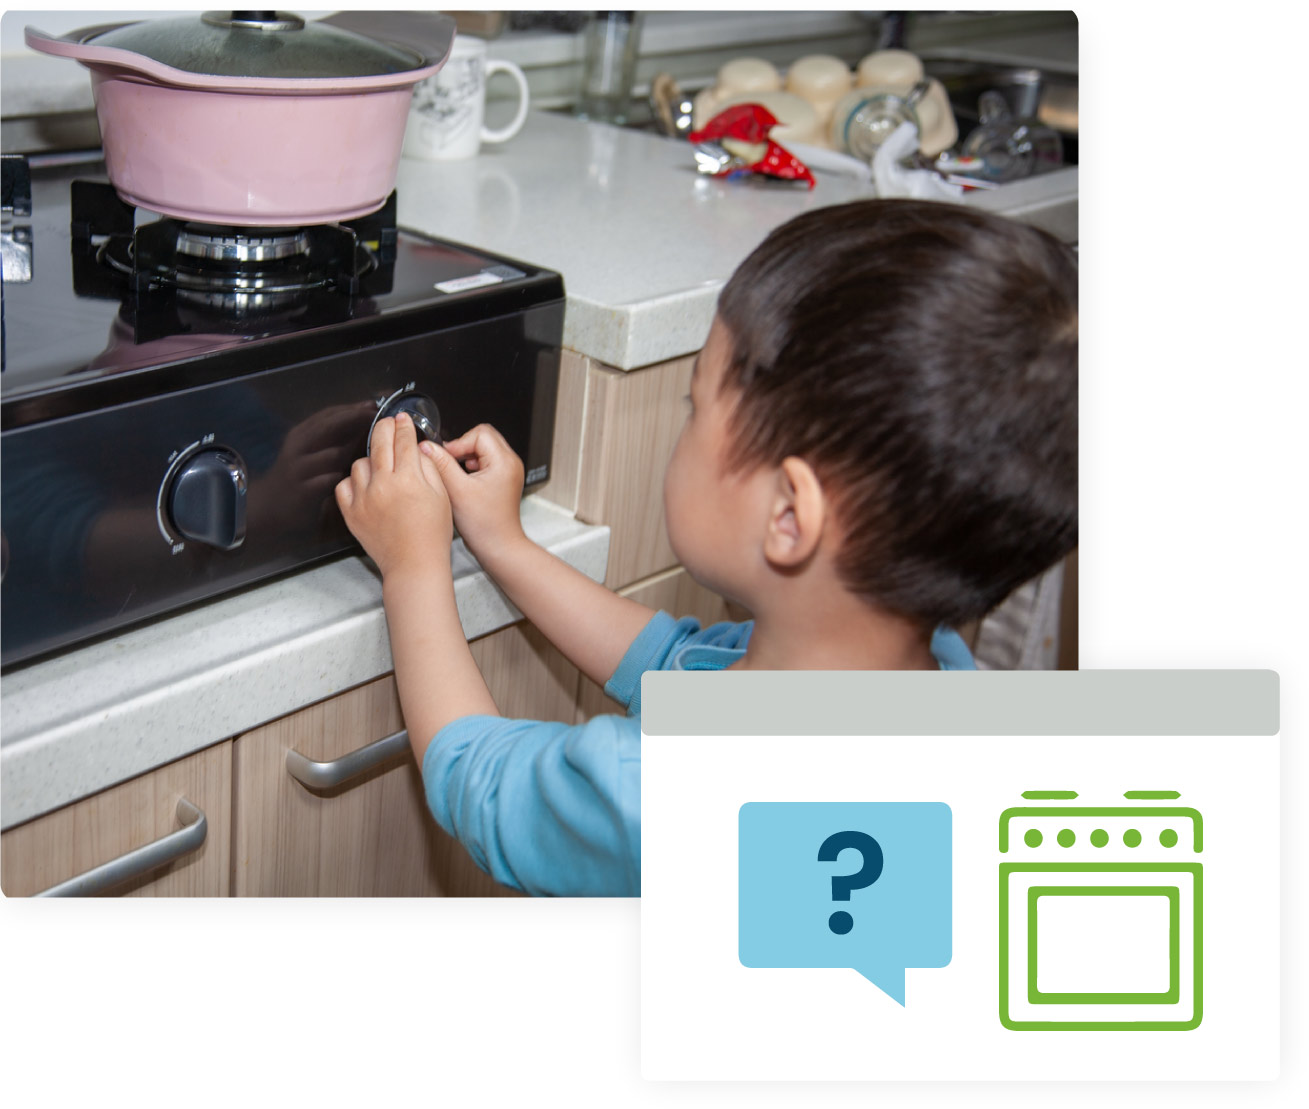 An image of a child standing in front of a gas stove with the burner off. In the foreground, there is an illustration with a question mark icon, and a stove icon.